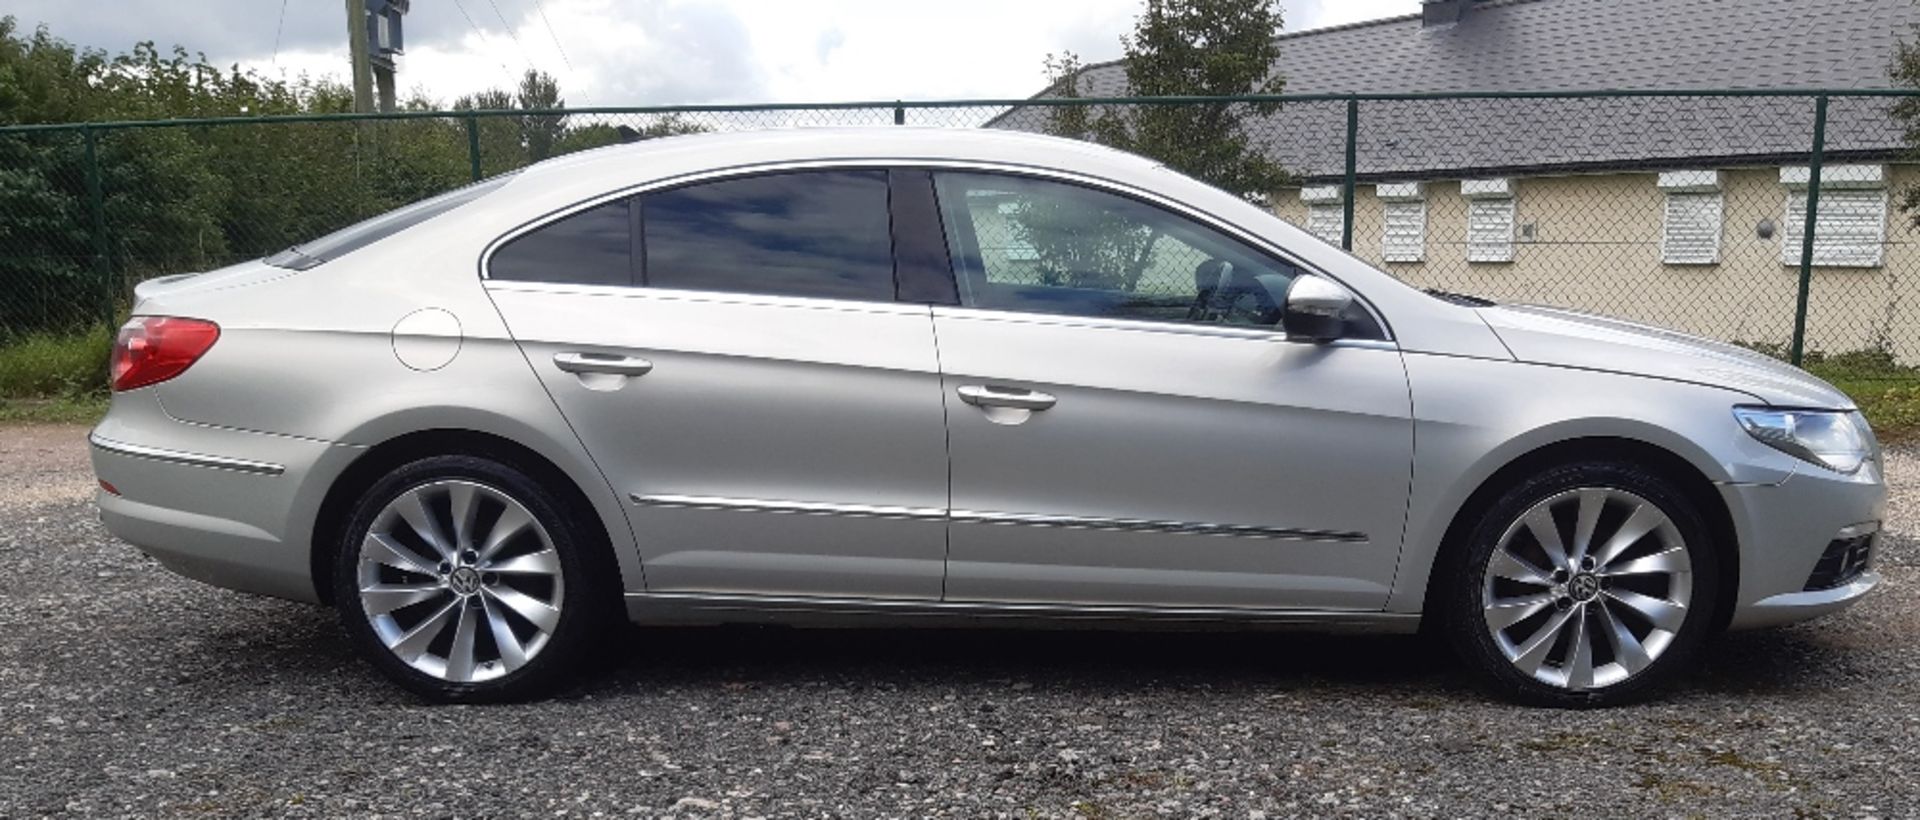 Volkswagen Passet GT TDI 170 Coupe in Silver - Image 2 of 13